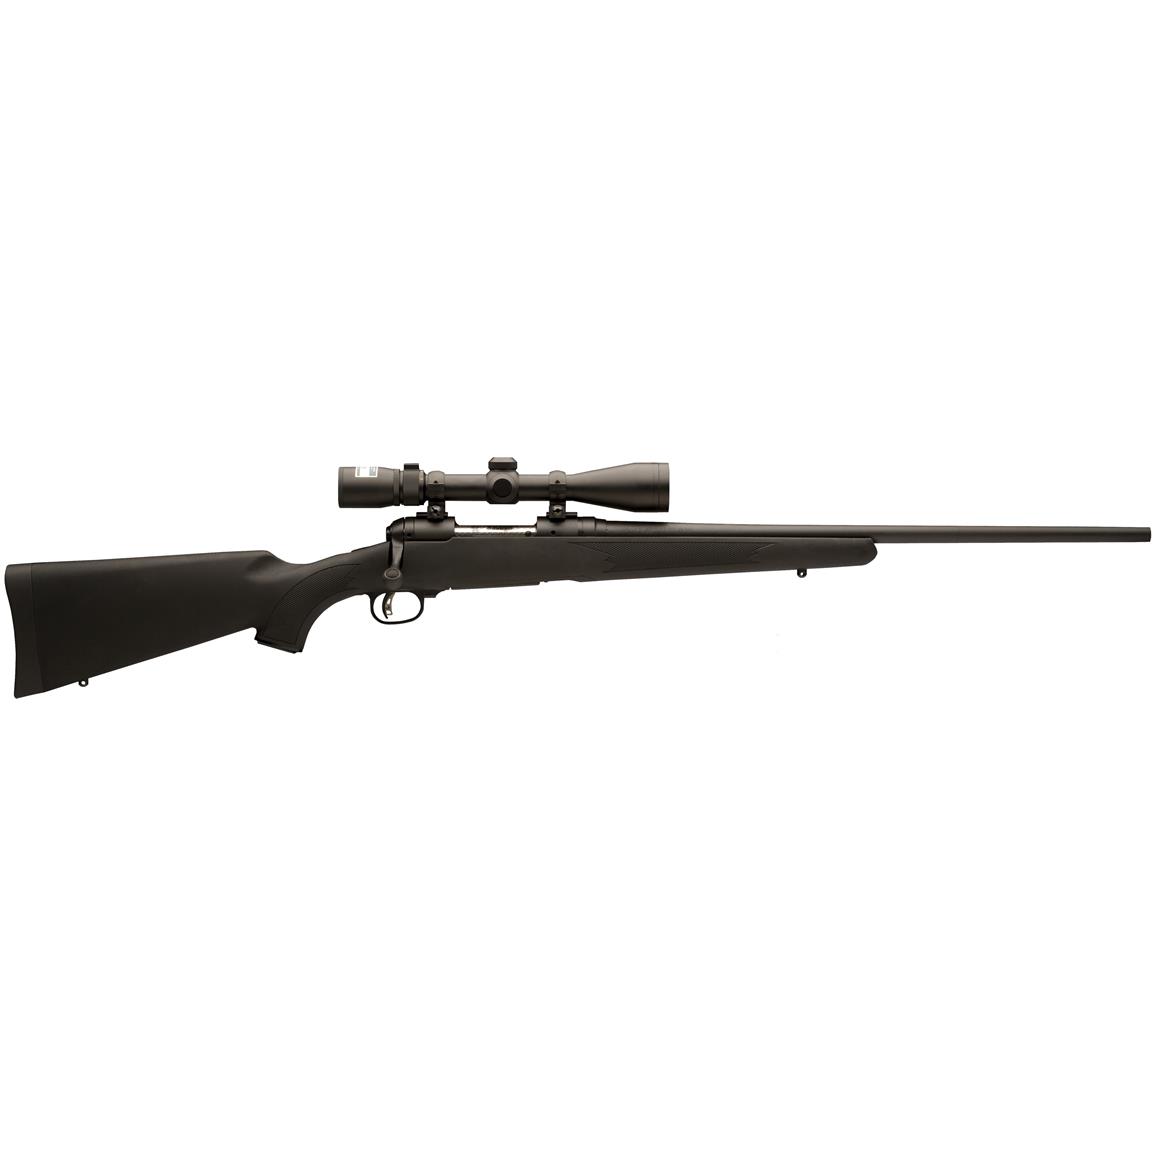 Savage 11 Trophy Hunter XP Package, Bolt Action, 6.5mm Creedmoor, Nikon BDC Scope, 4+1 Rounds